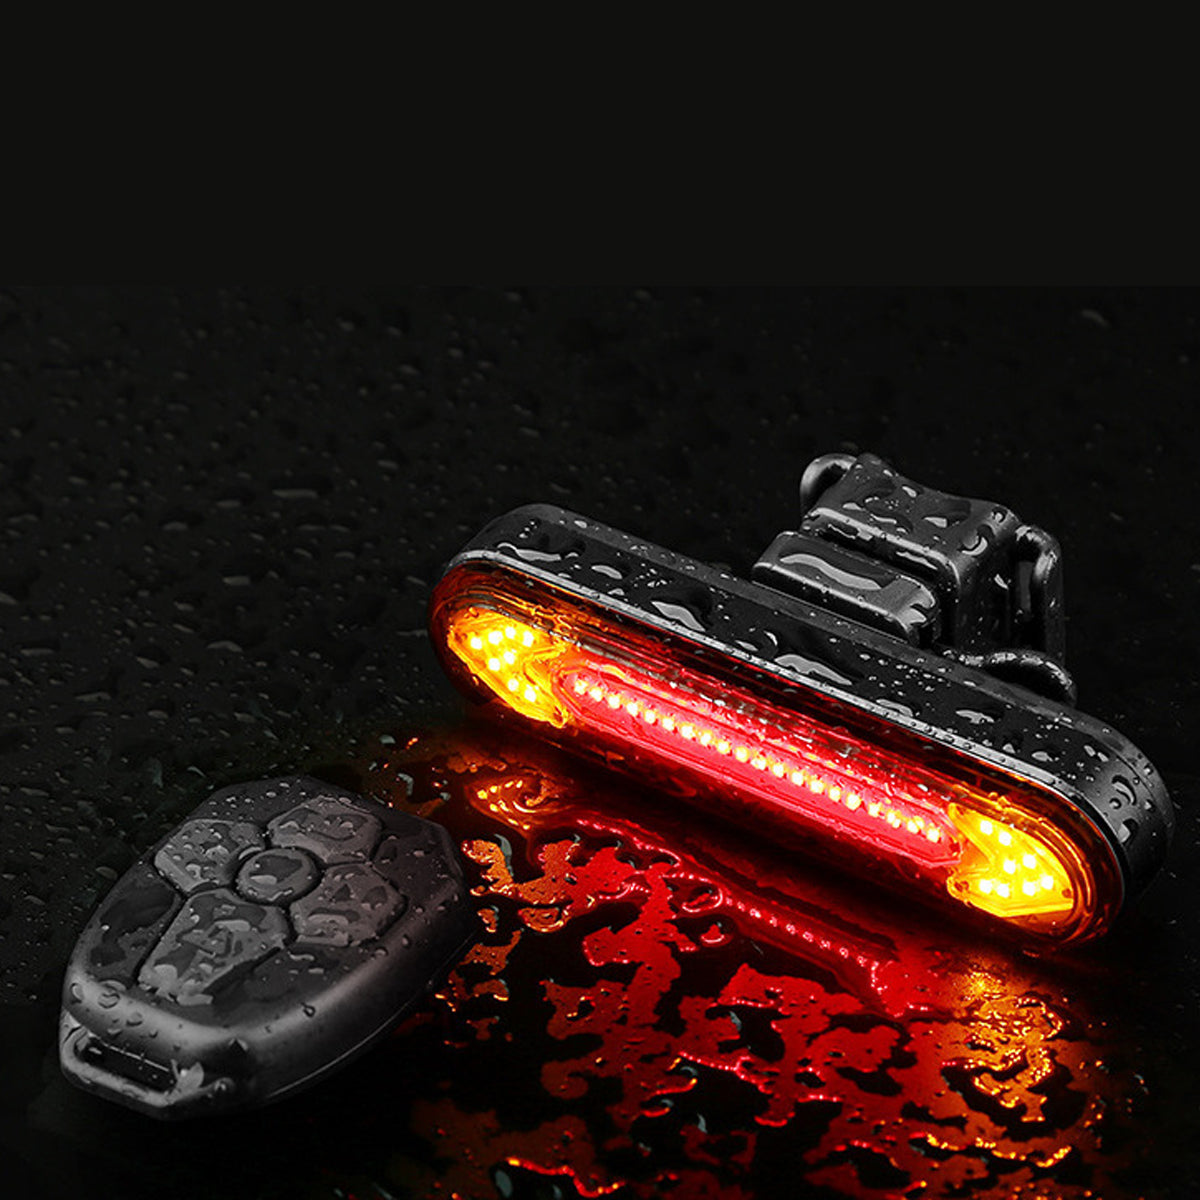 Firebrick Wireless USB Rechargeable Remote Control Turn Signal Bicycle Tail Light 50 Lumen